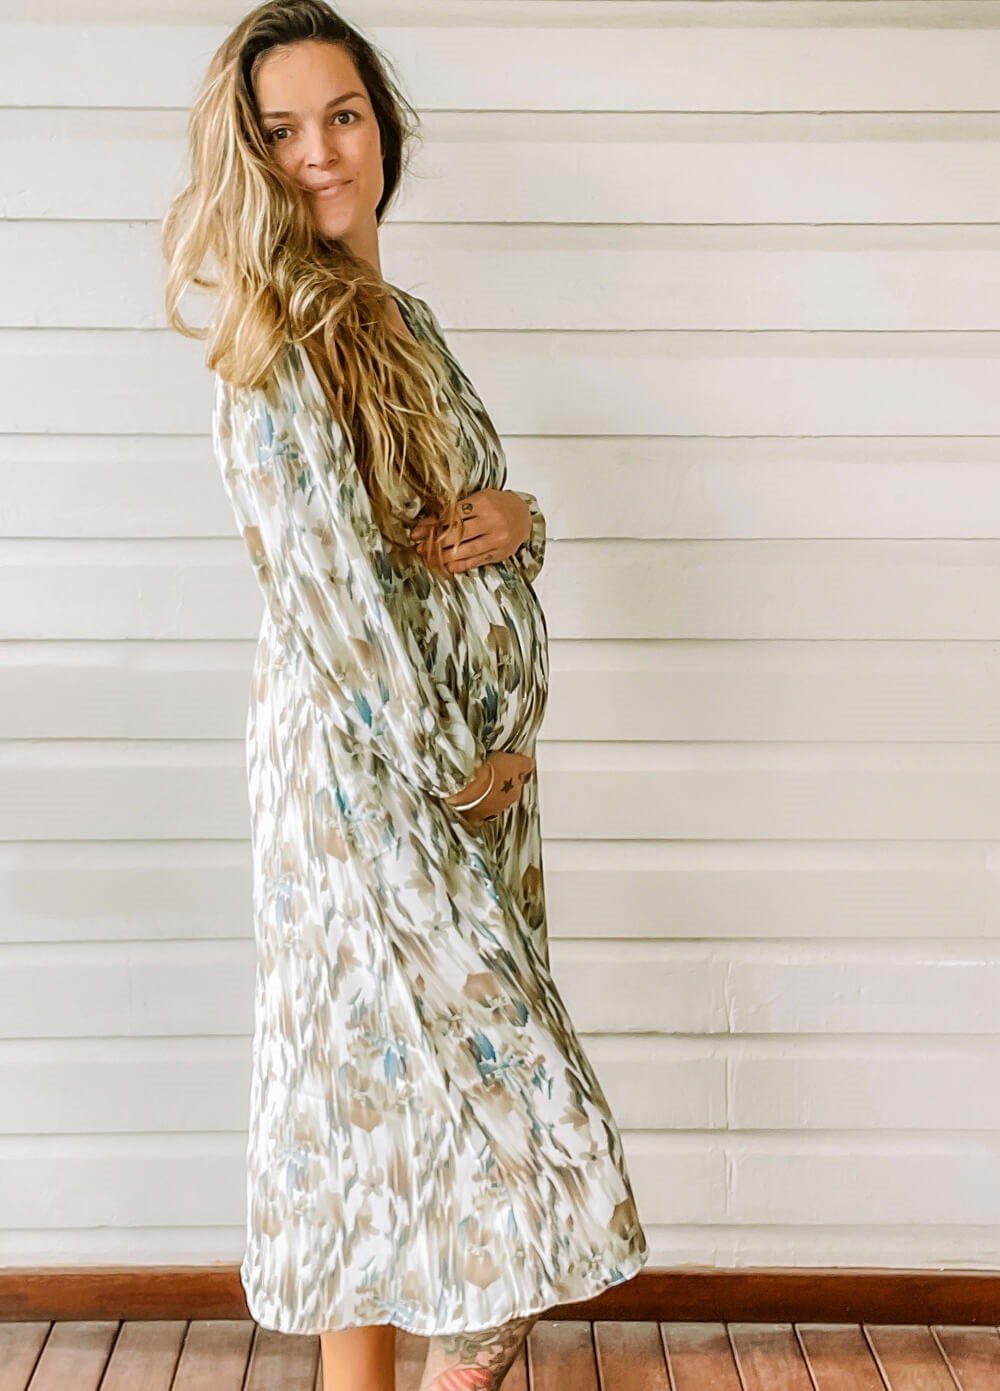 Lait & Co - Evie Maternity Midi Dress in Taupe Floral